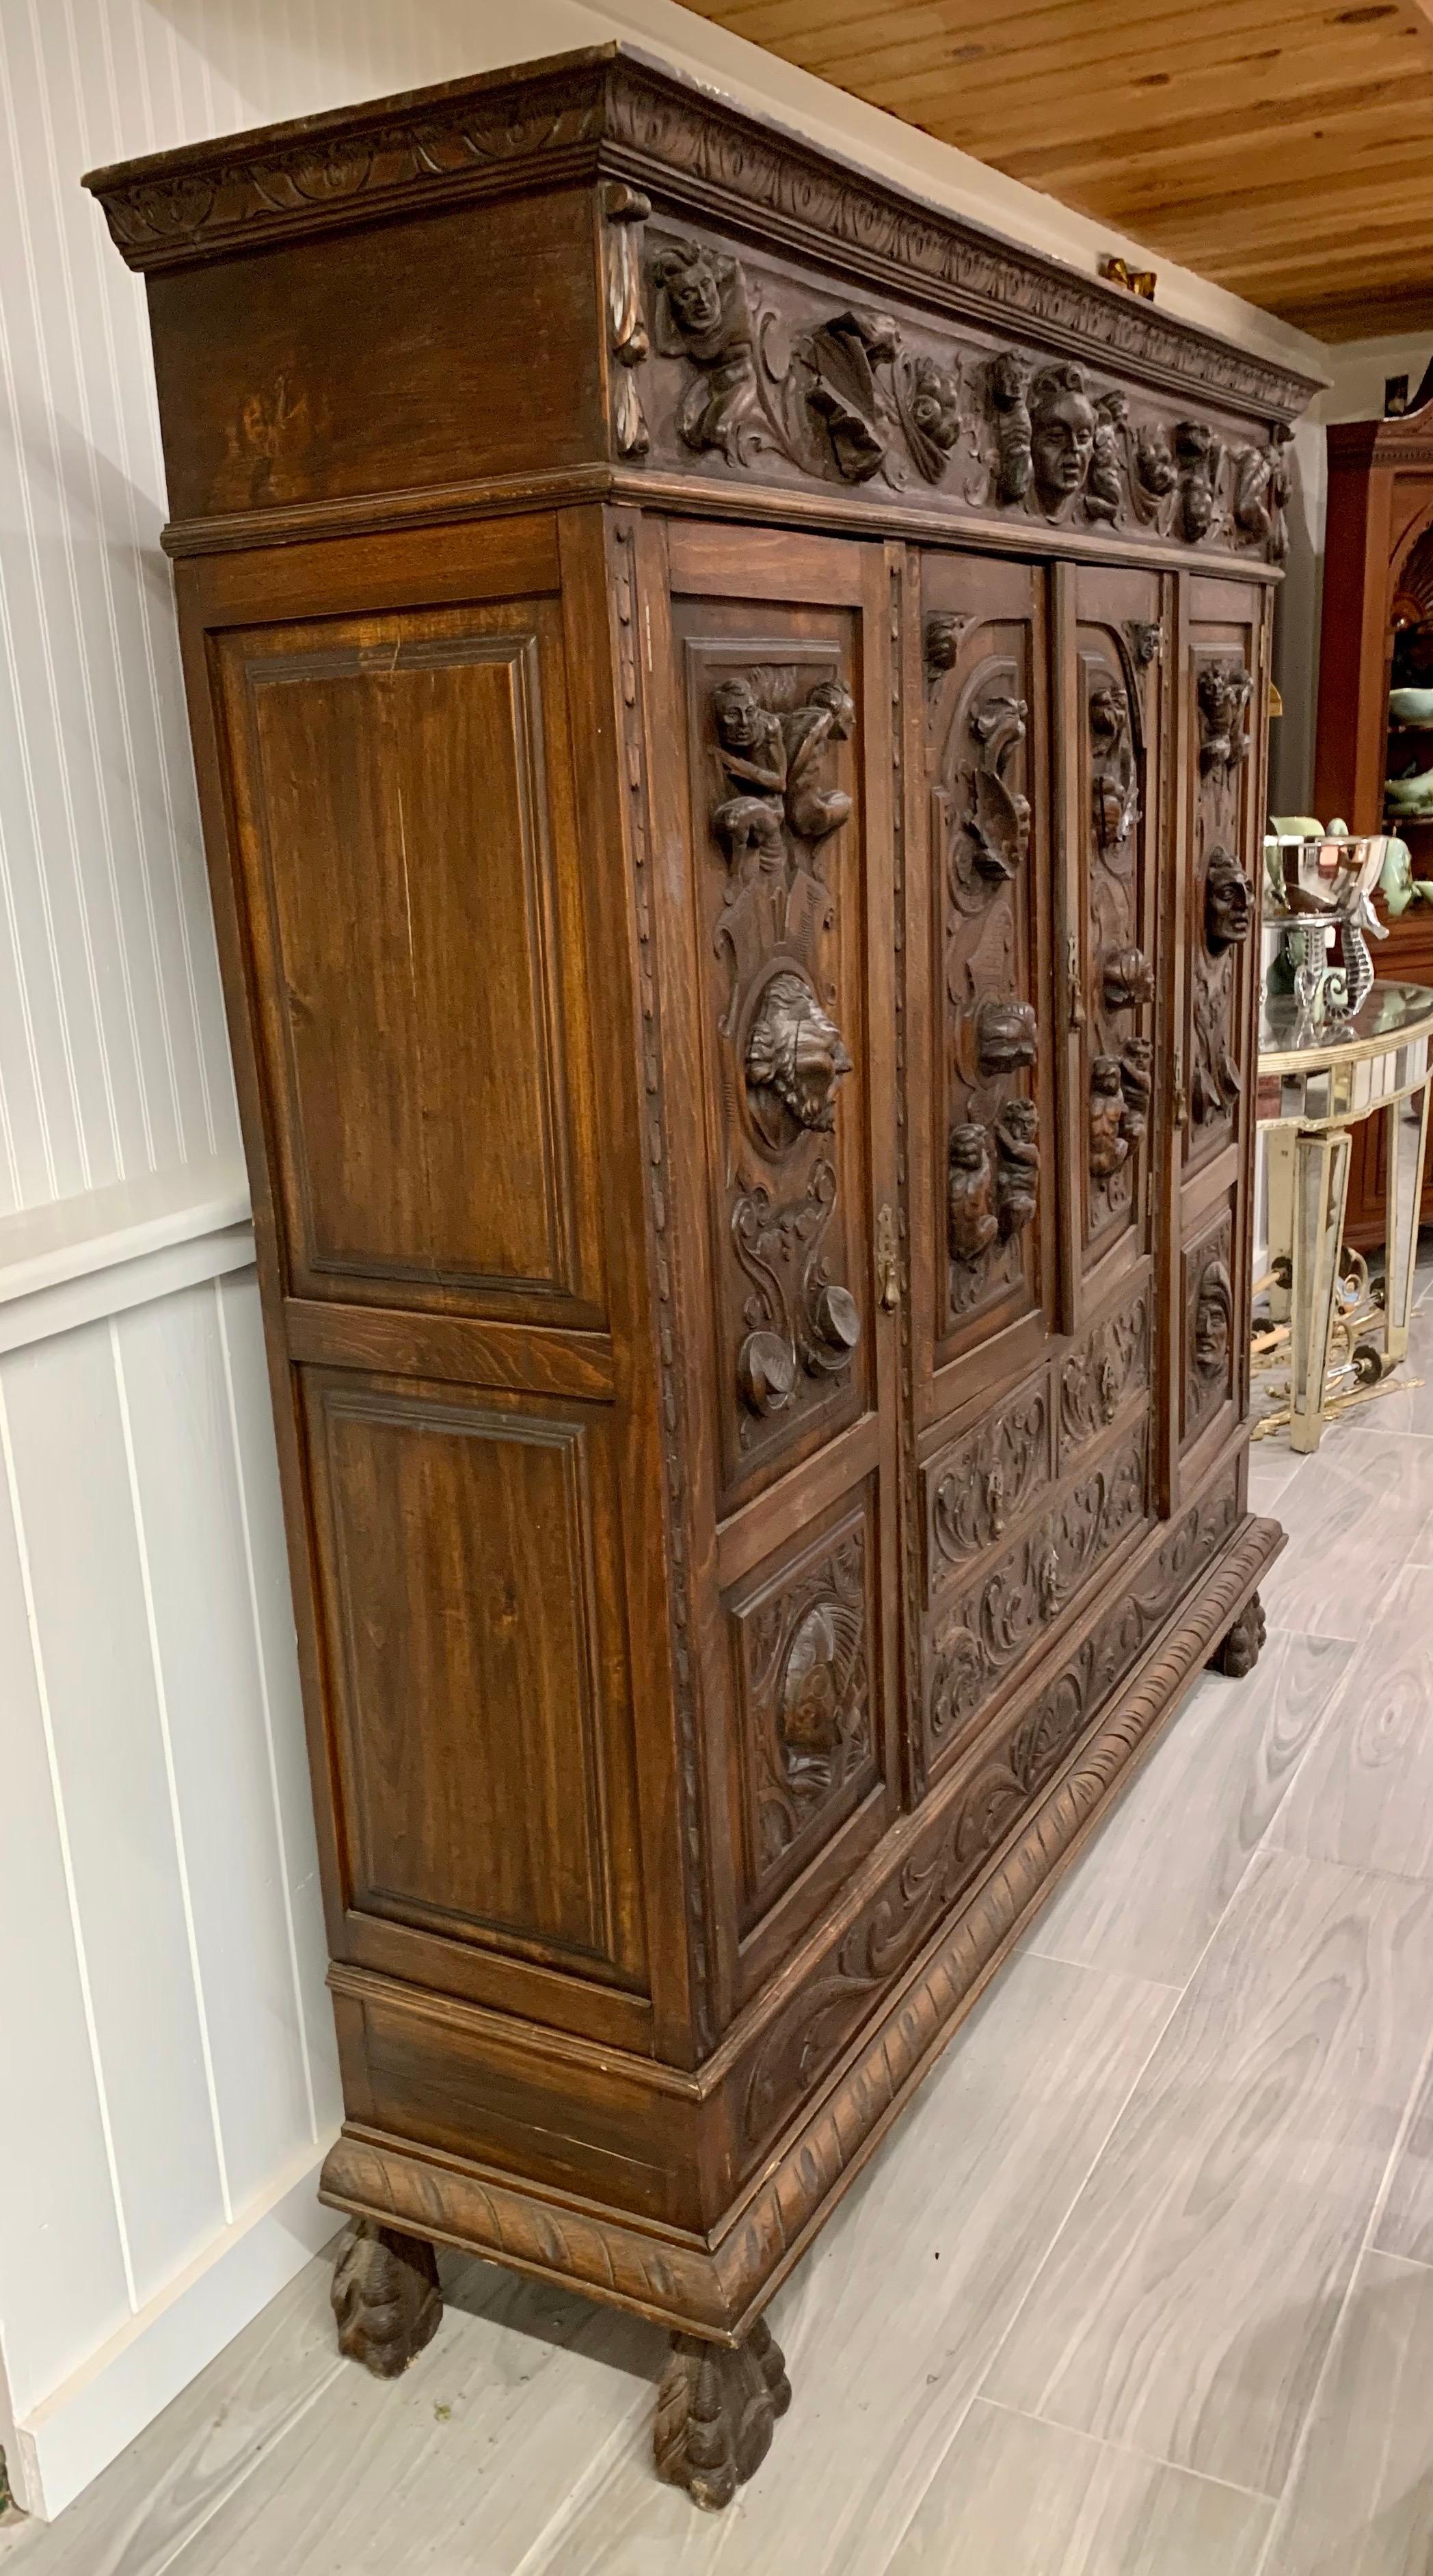 Magnificent French antique cabinet/cupboard with incredible carved black walnut wood detail that is nothing short of breathtaking. Now more than ever, home is where the heart is.